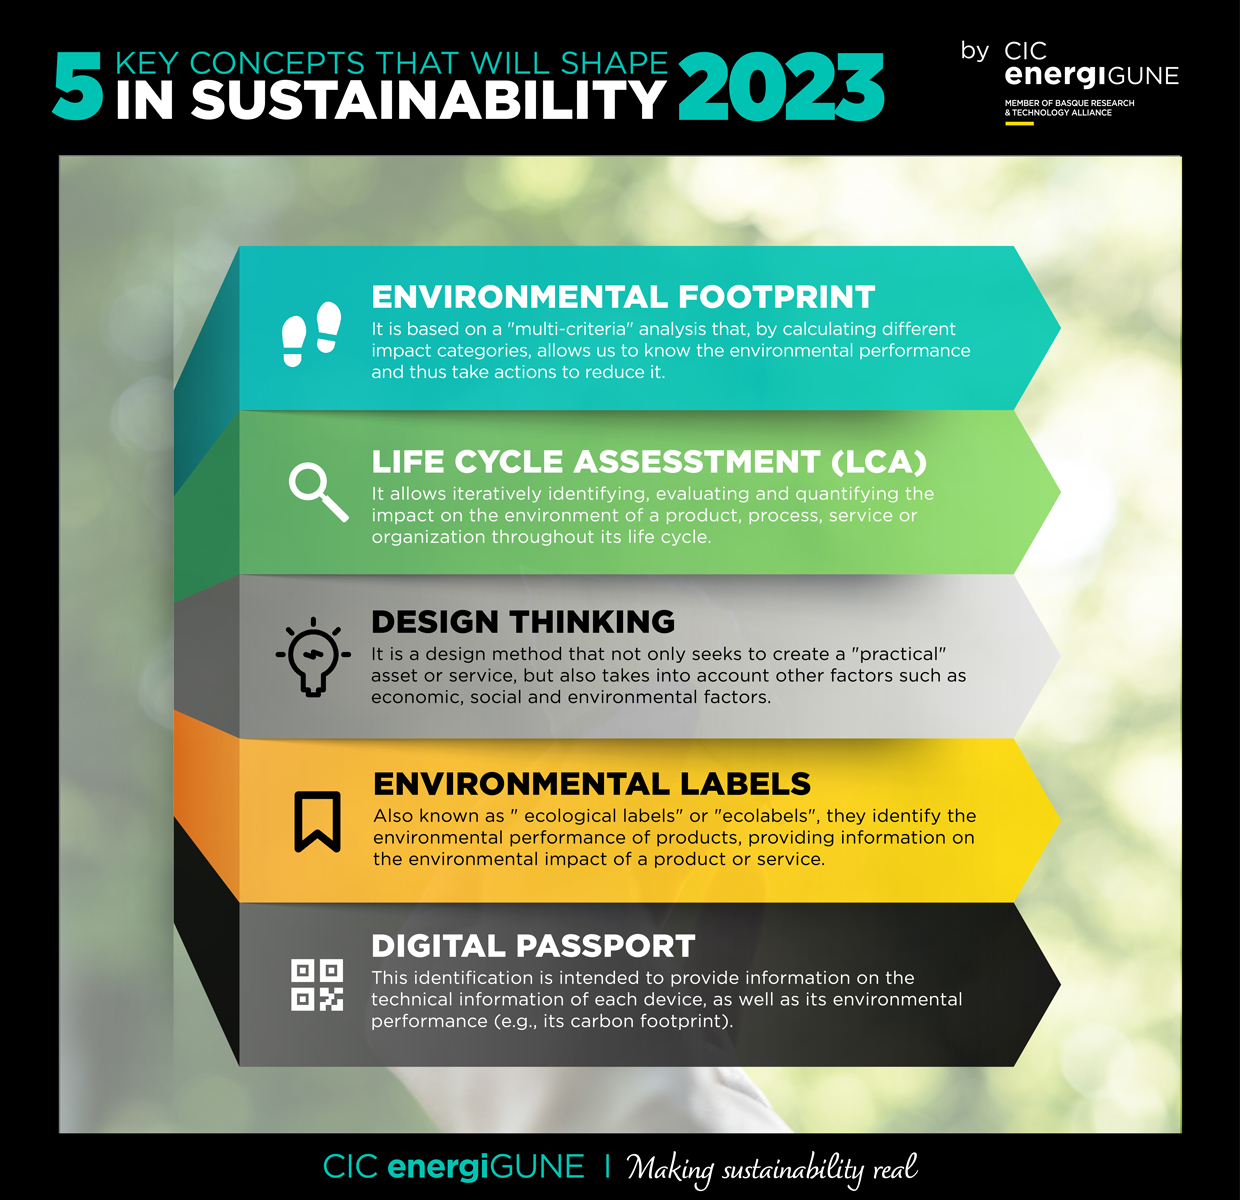 ENVIRONMENTAL FOOTPRINT, DESIGN FOR THINGKING, LCA, PASSPORT... THE KEY CONCEPTS THAT WILL MARK 2023 IN SUSTAINABILITY